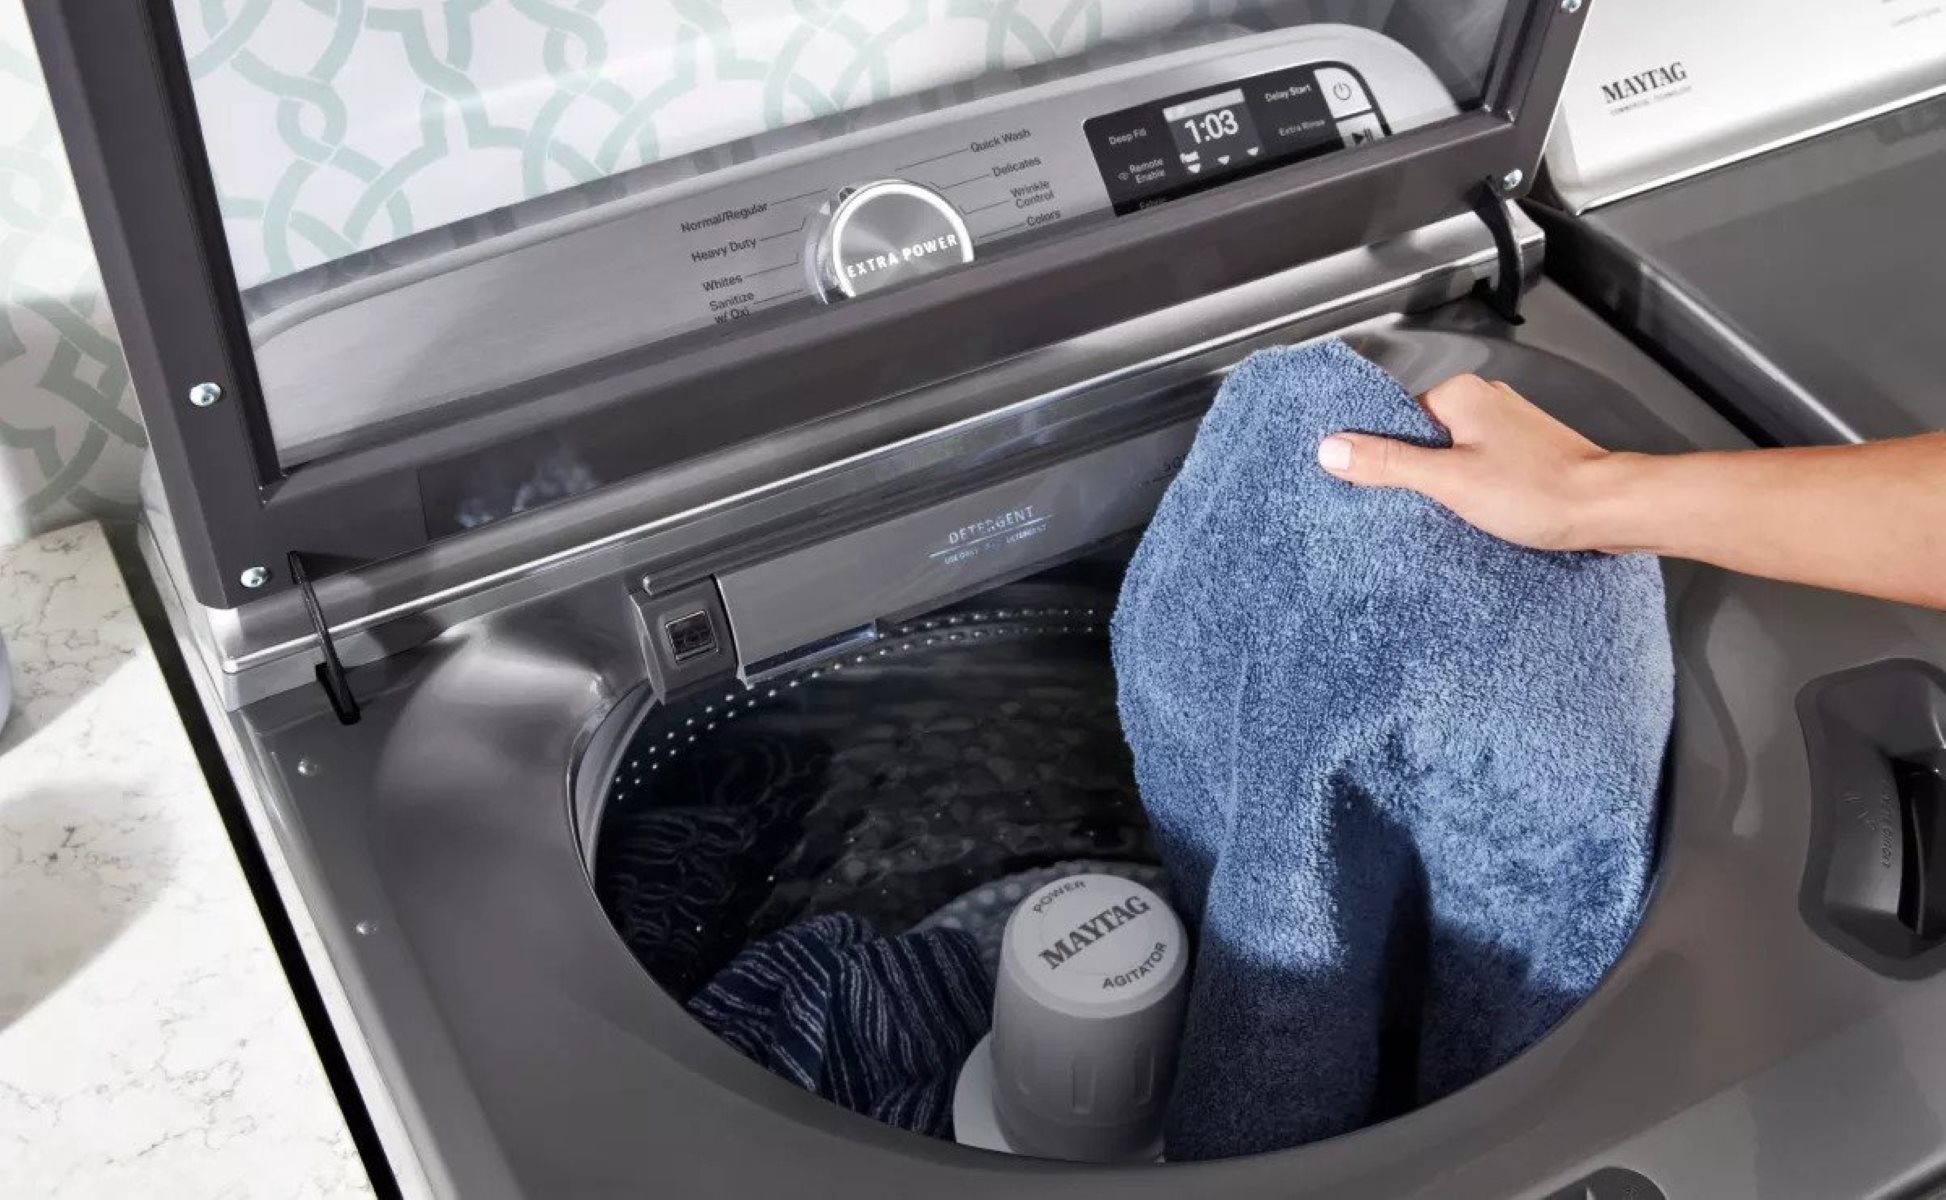 How To Fix The Error Code F22 For Maytag Dryer